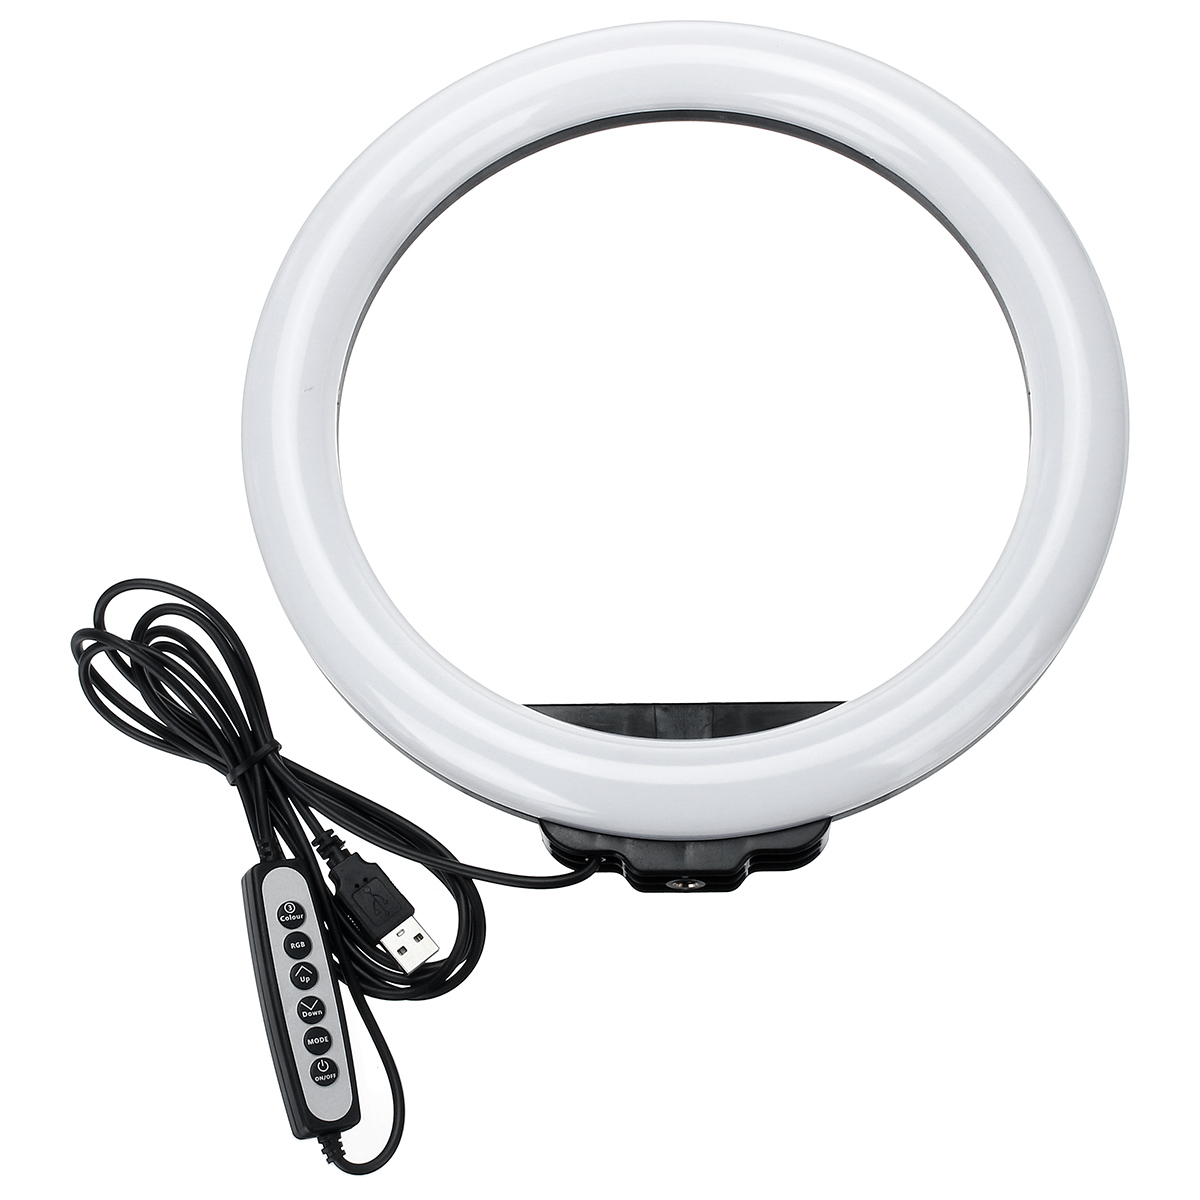 10-inch-LED-Ring-Fill-Light-3-Modes-of-Color-Temperature-Colorful-RGB-Live-Broadcast-Desktop-Phone-H-1871503-10